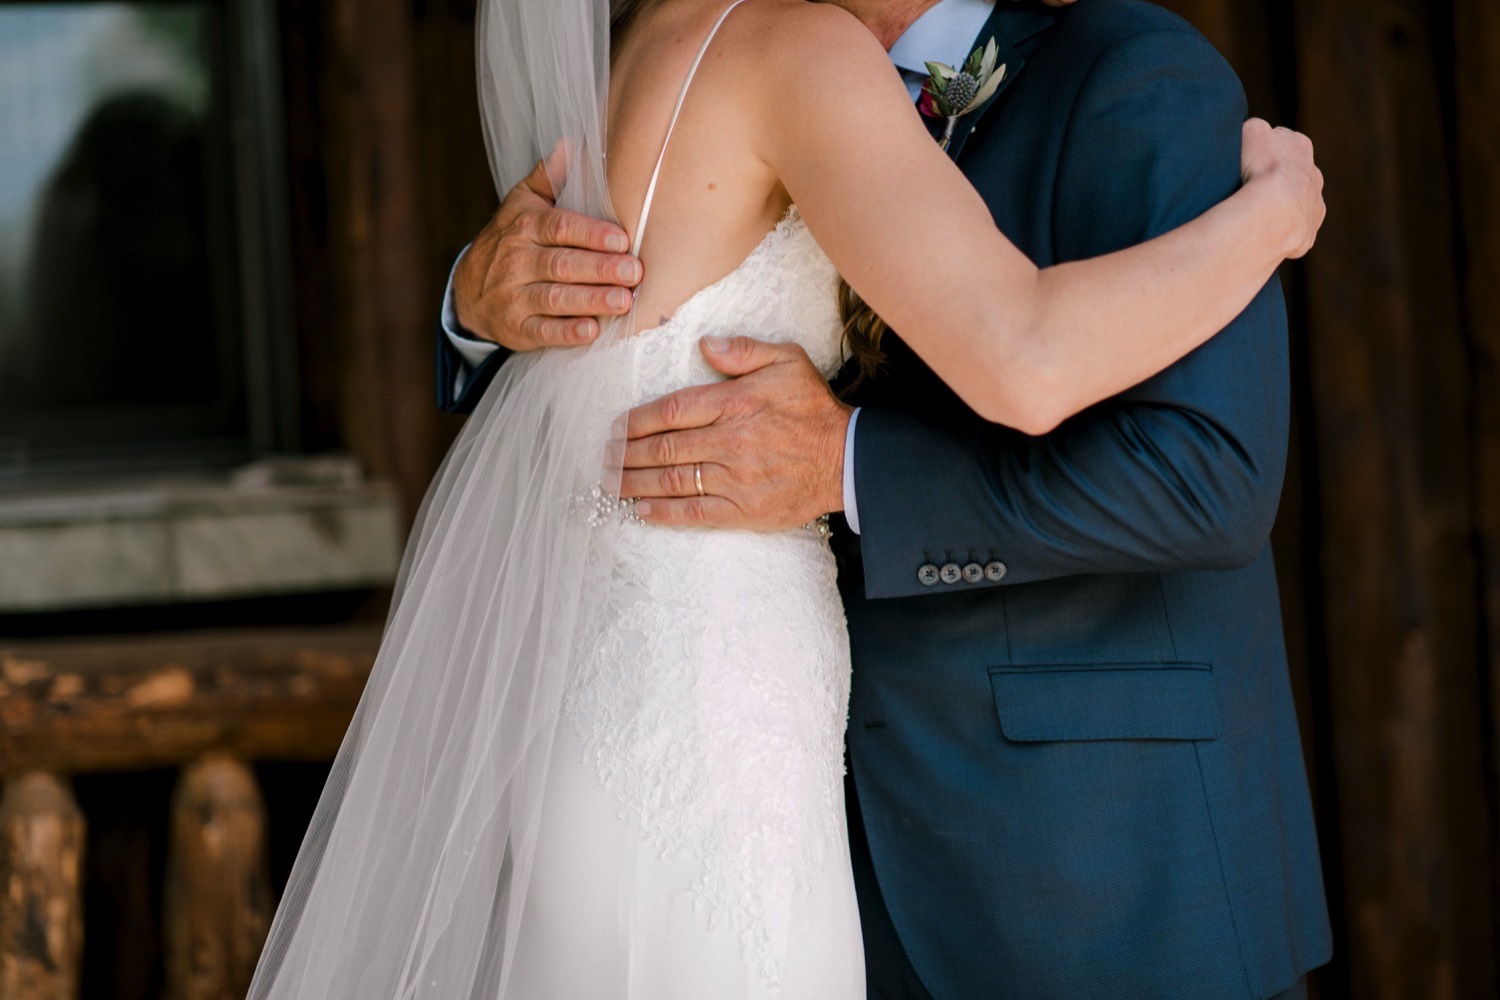 Kristen and her father had an emotional reaction when they saw each other for the first time before Kristen's wedding at Spruce Mountain Ranch in Larkspur, Colorado.